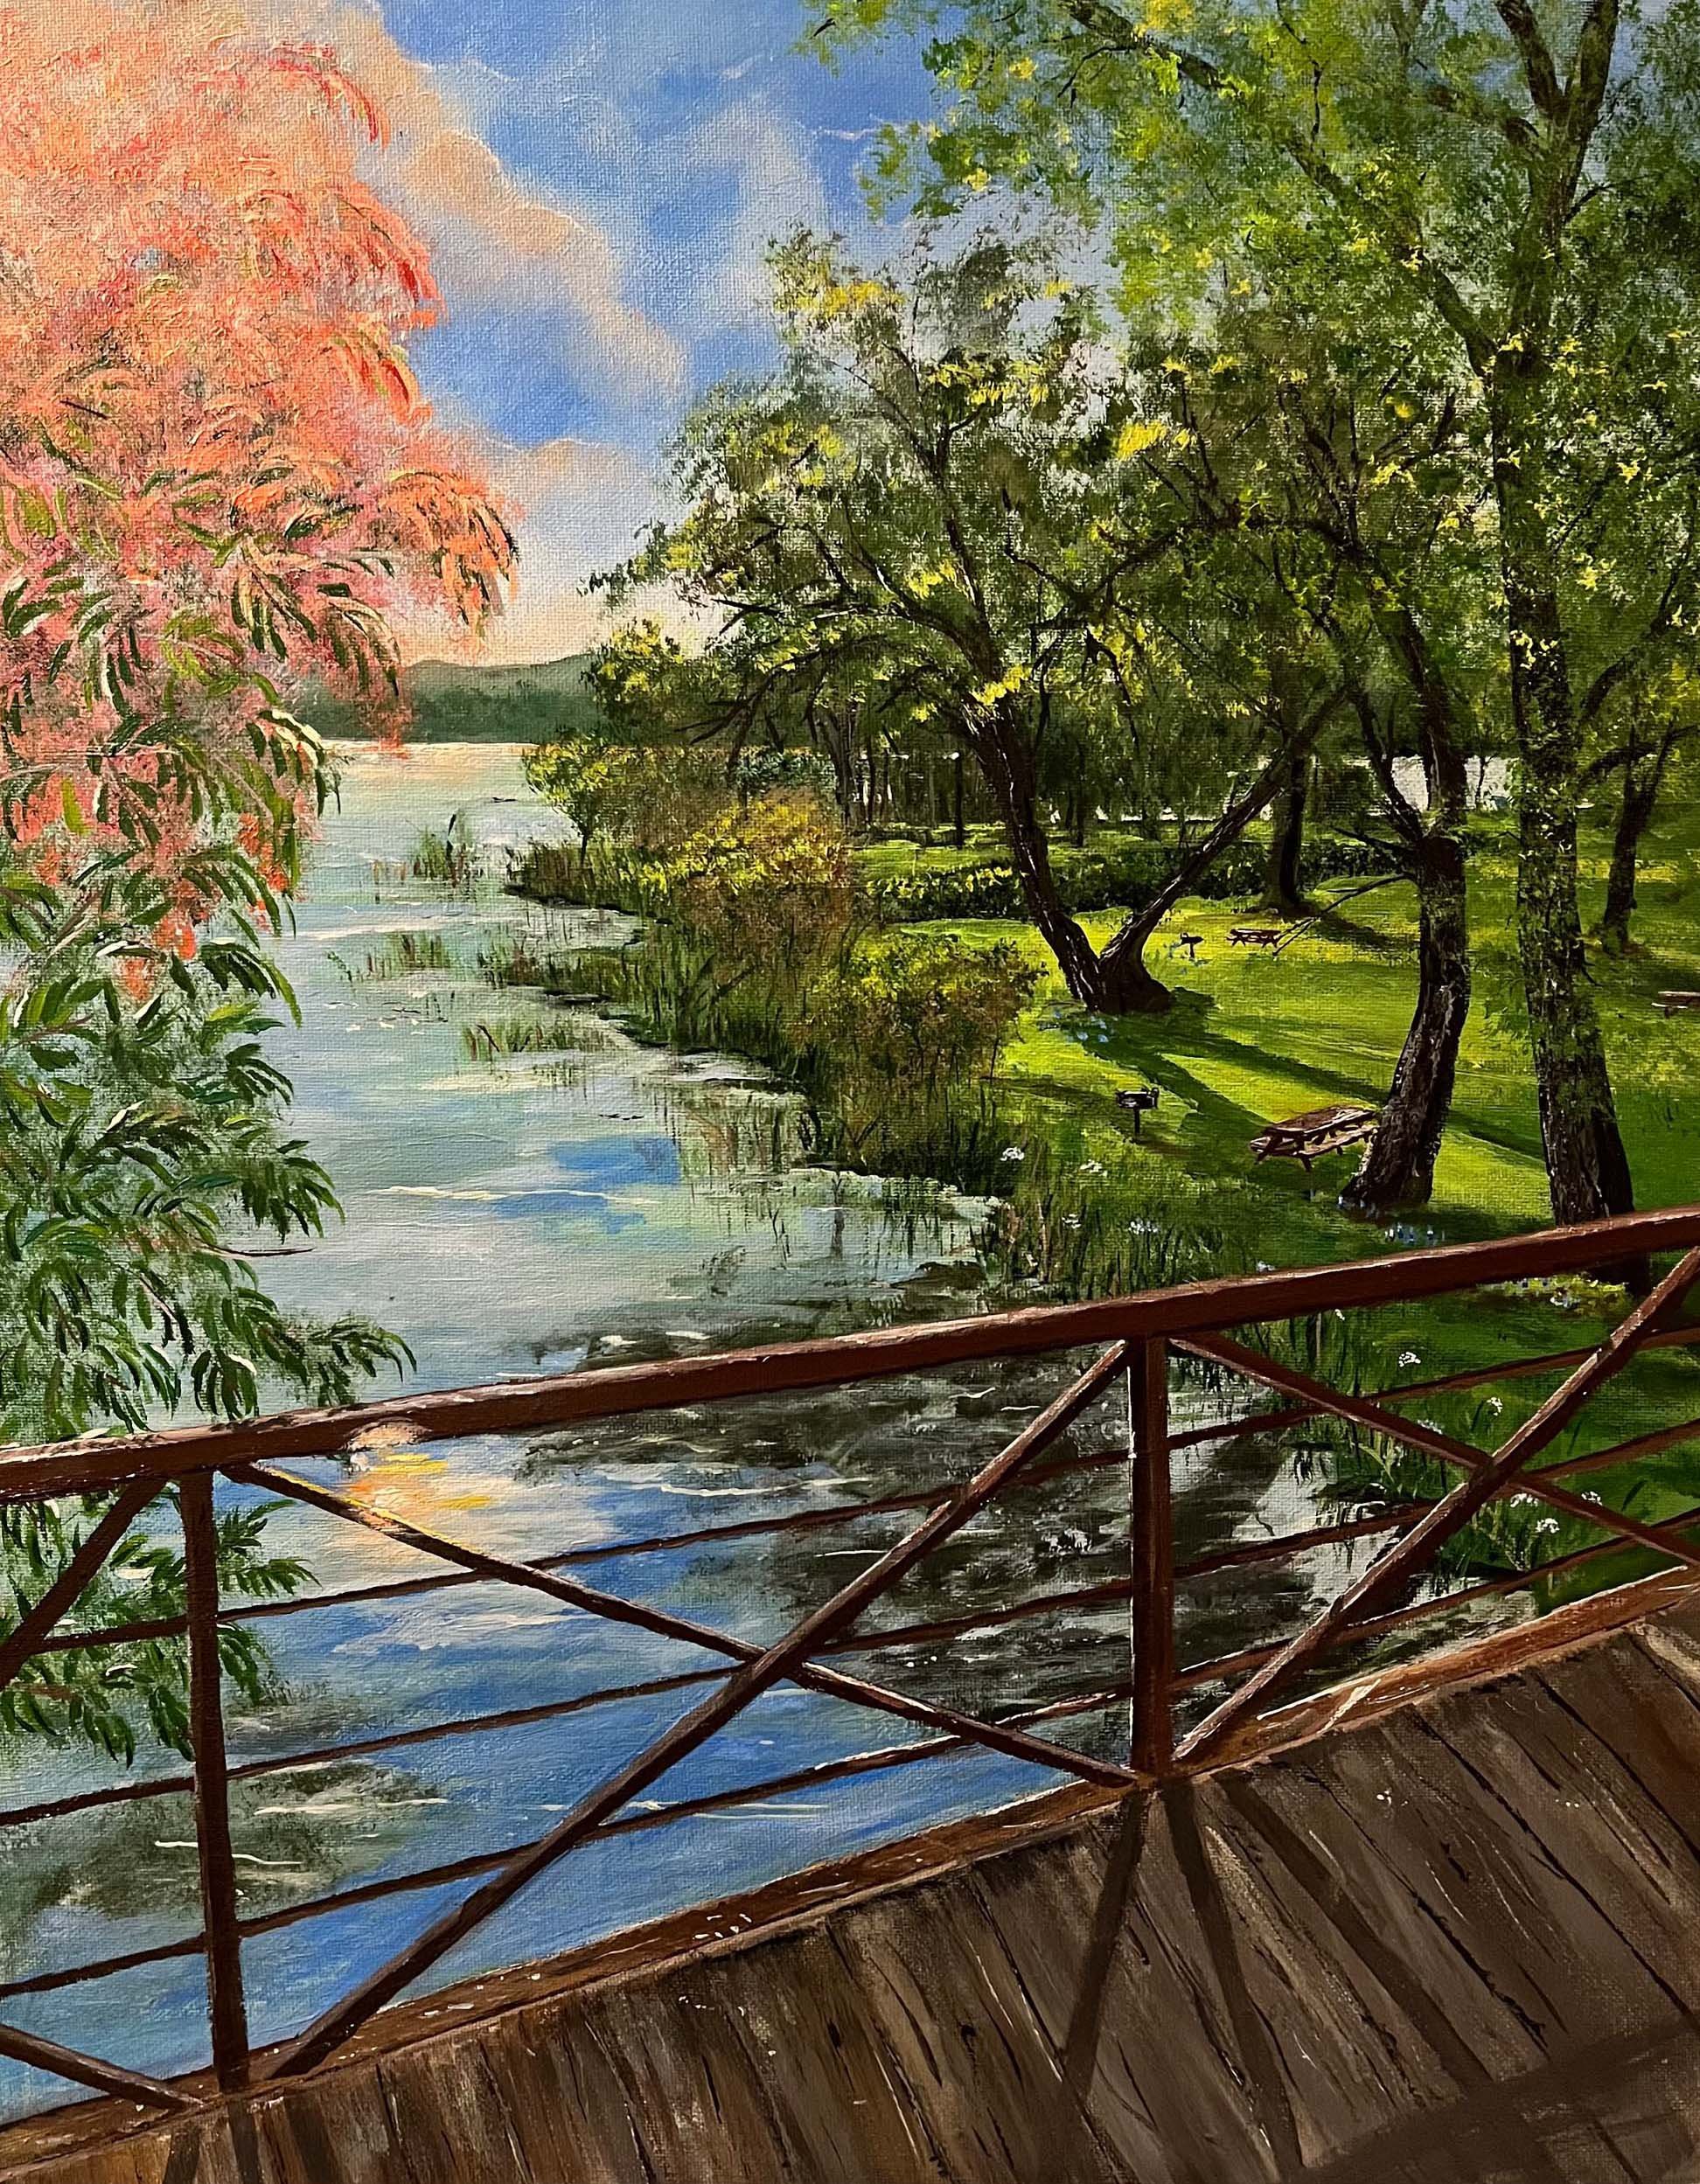 A View from a Bridge-acrylic on Panel-20” x 26”